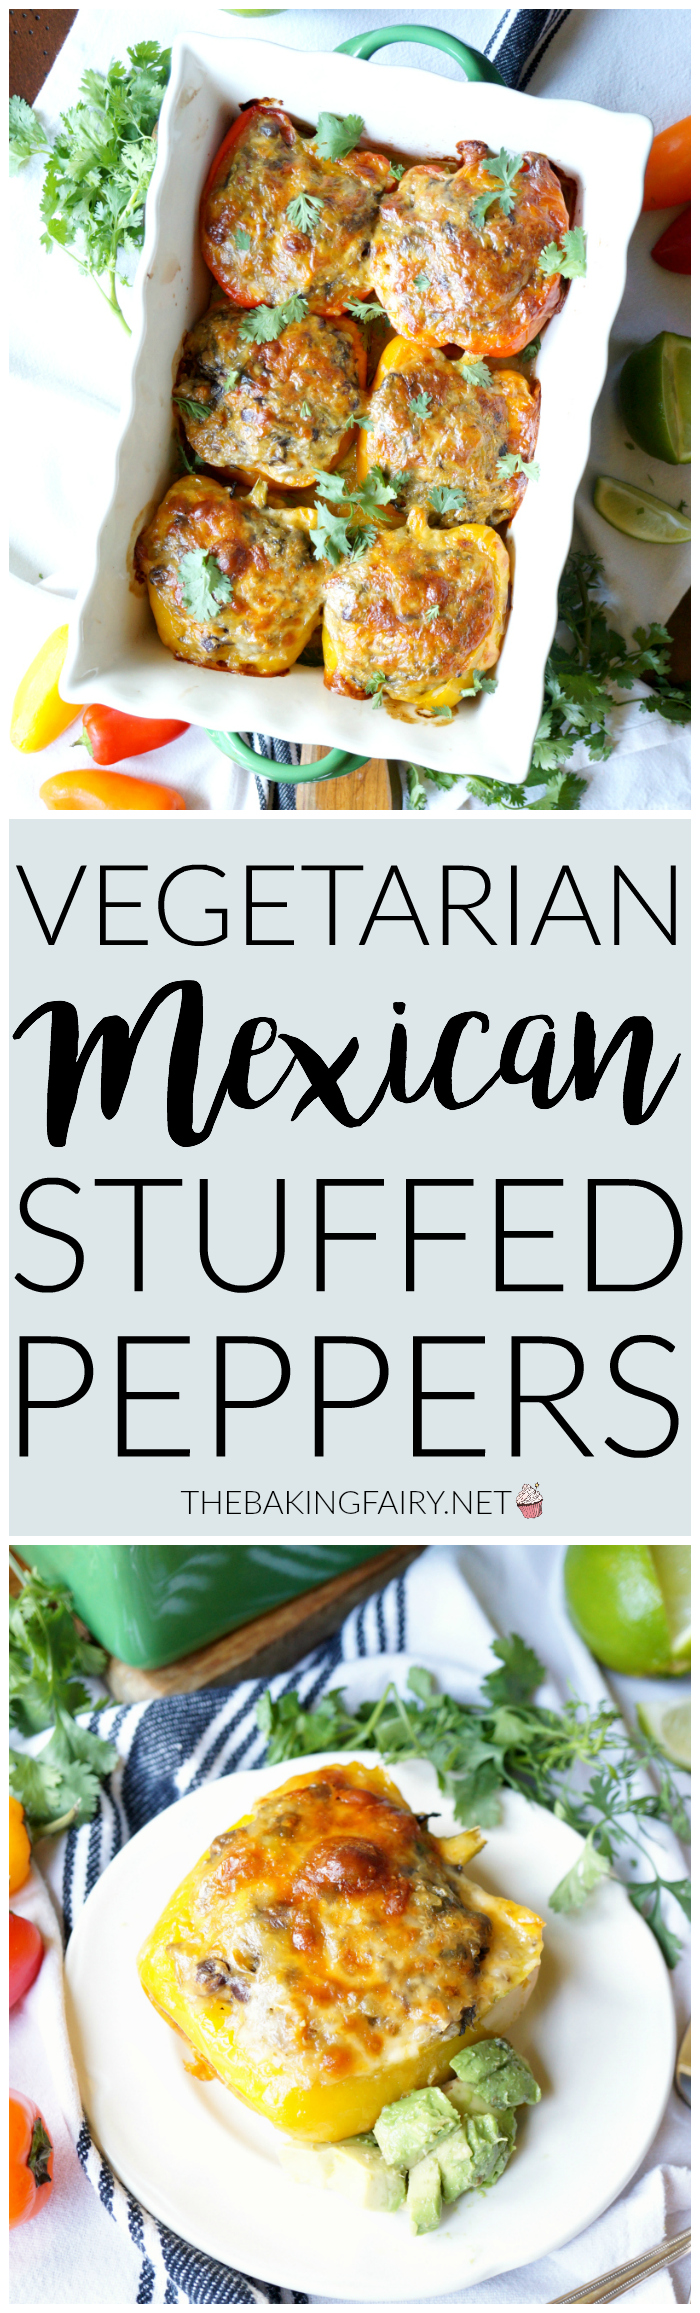 vegetarian Mexican stuffed peppers | The Baking Fairy